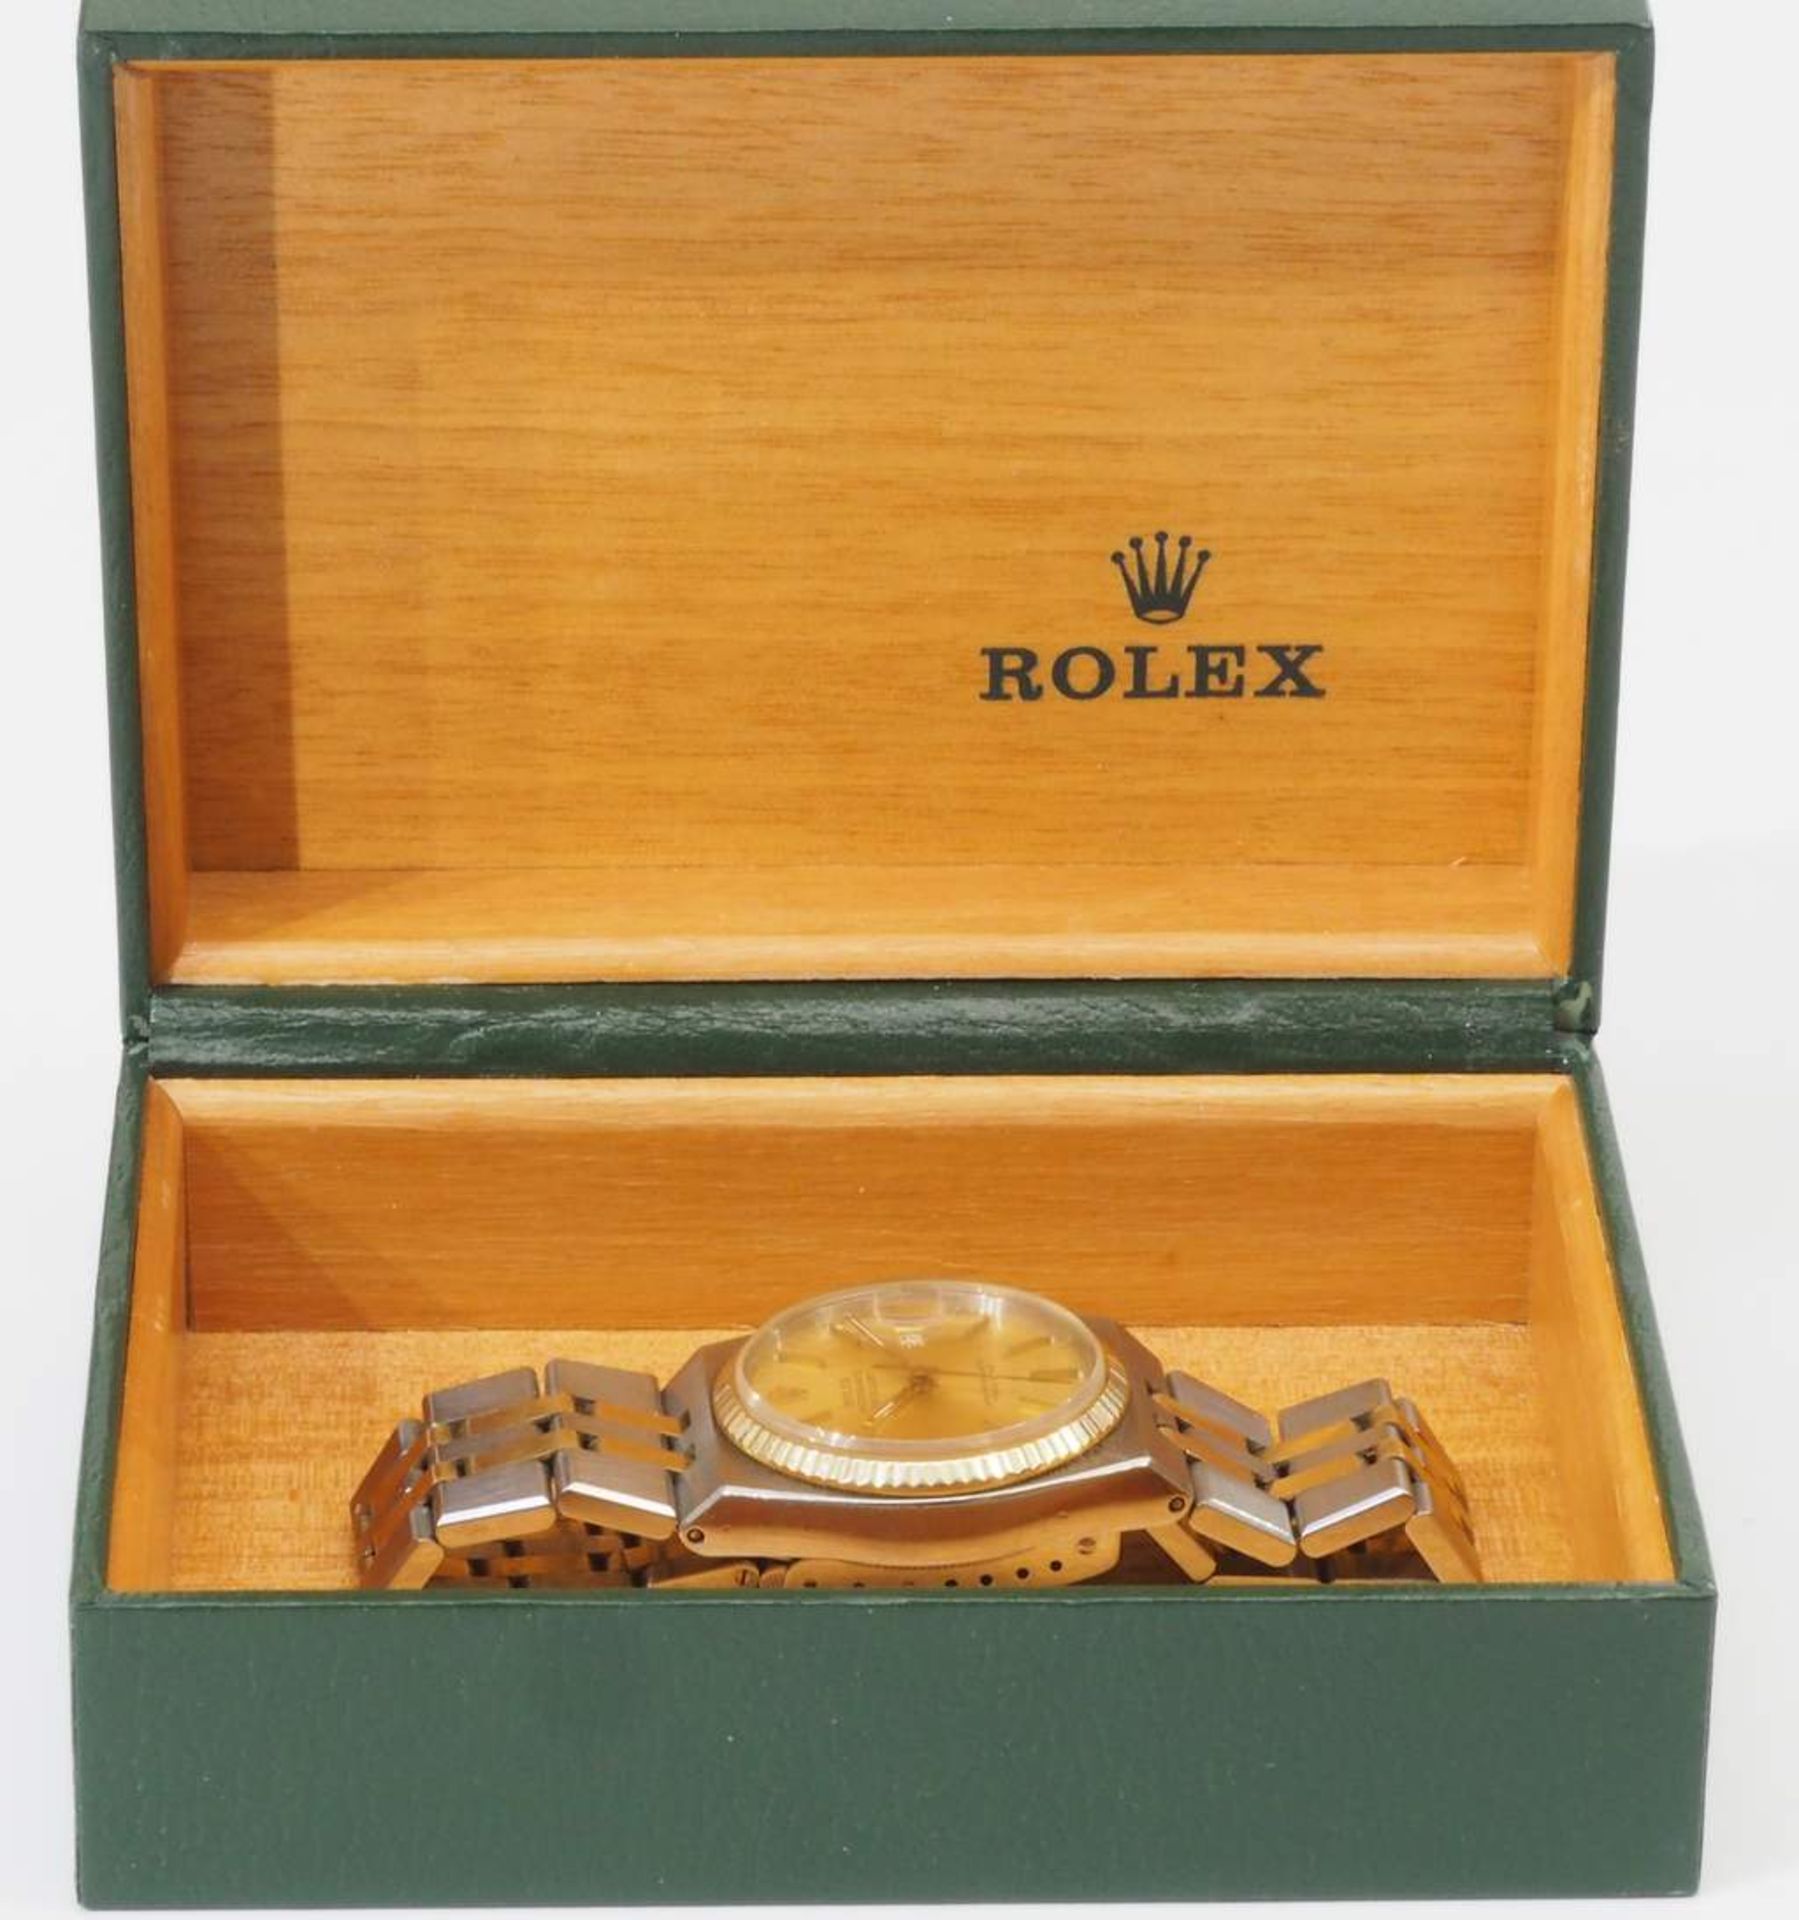 ROLEX Datejust Oysterquarz. - Image 8 of 12